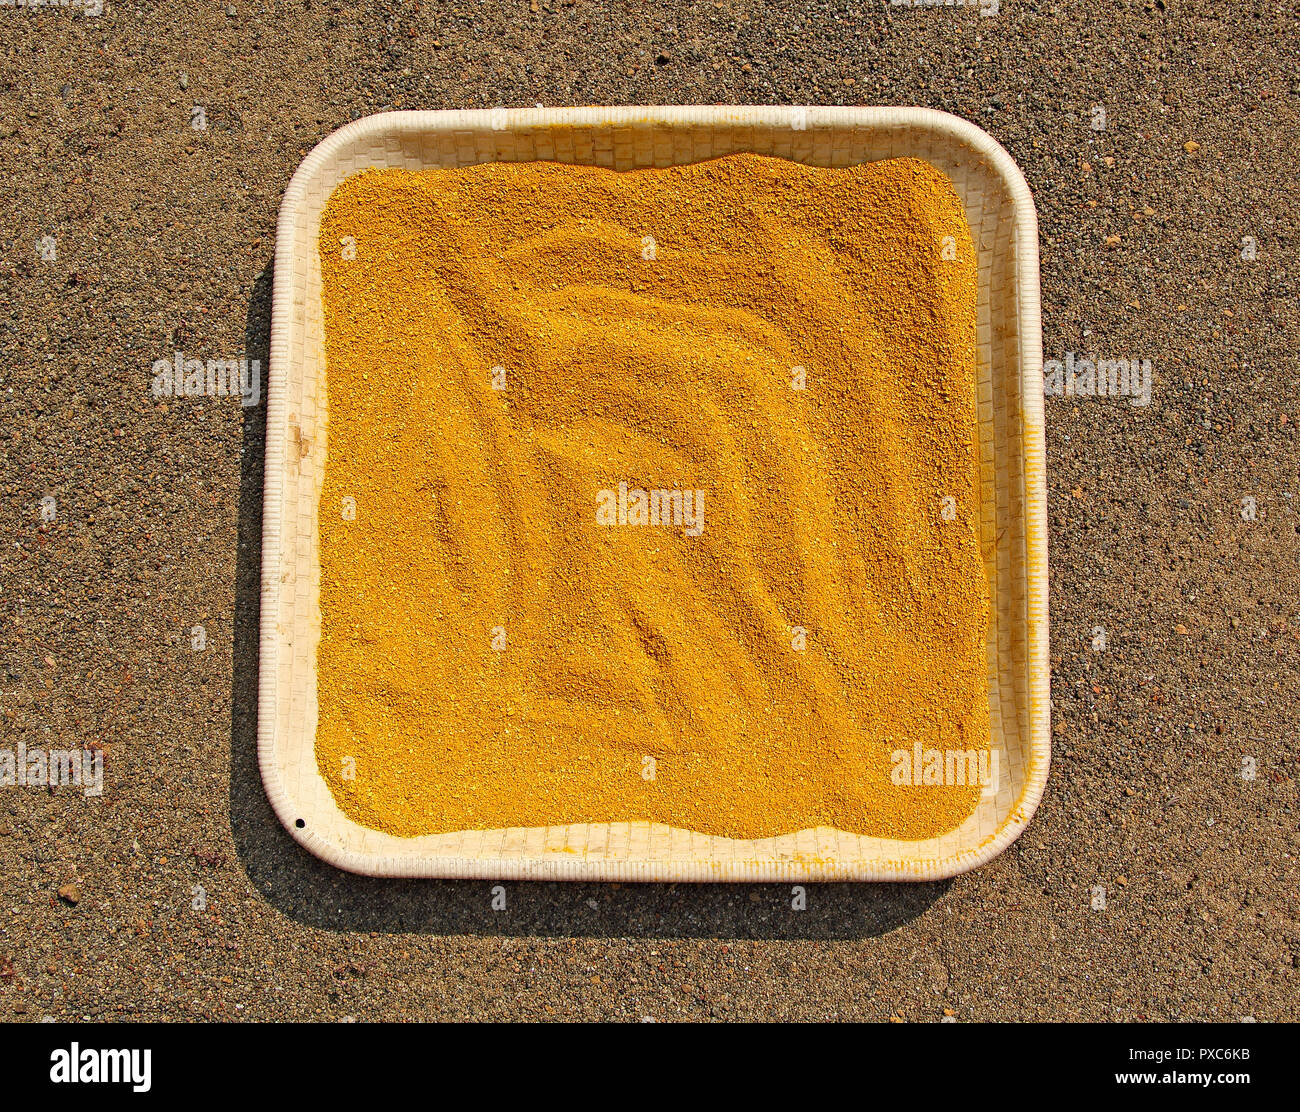 Sun drying fresh organic turmeric powder produced in Kerala, India. Turmeric is a coloring and flavoring agent in Asian cuisines and also used as dye Stock Photo